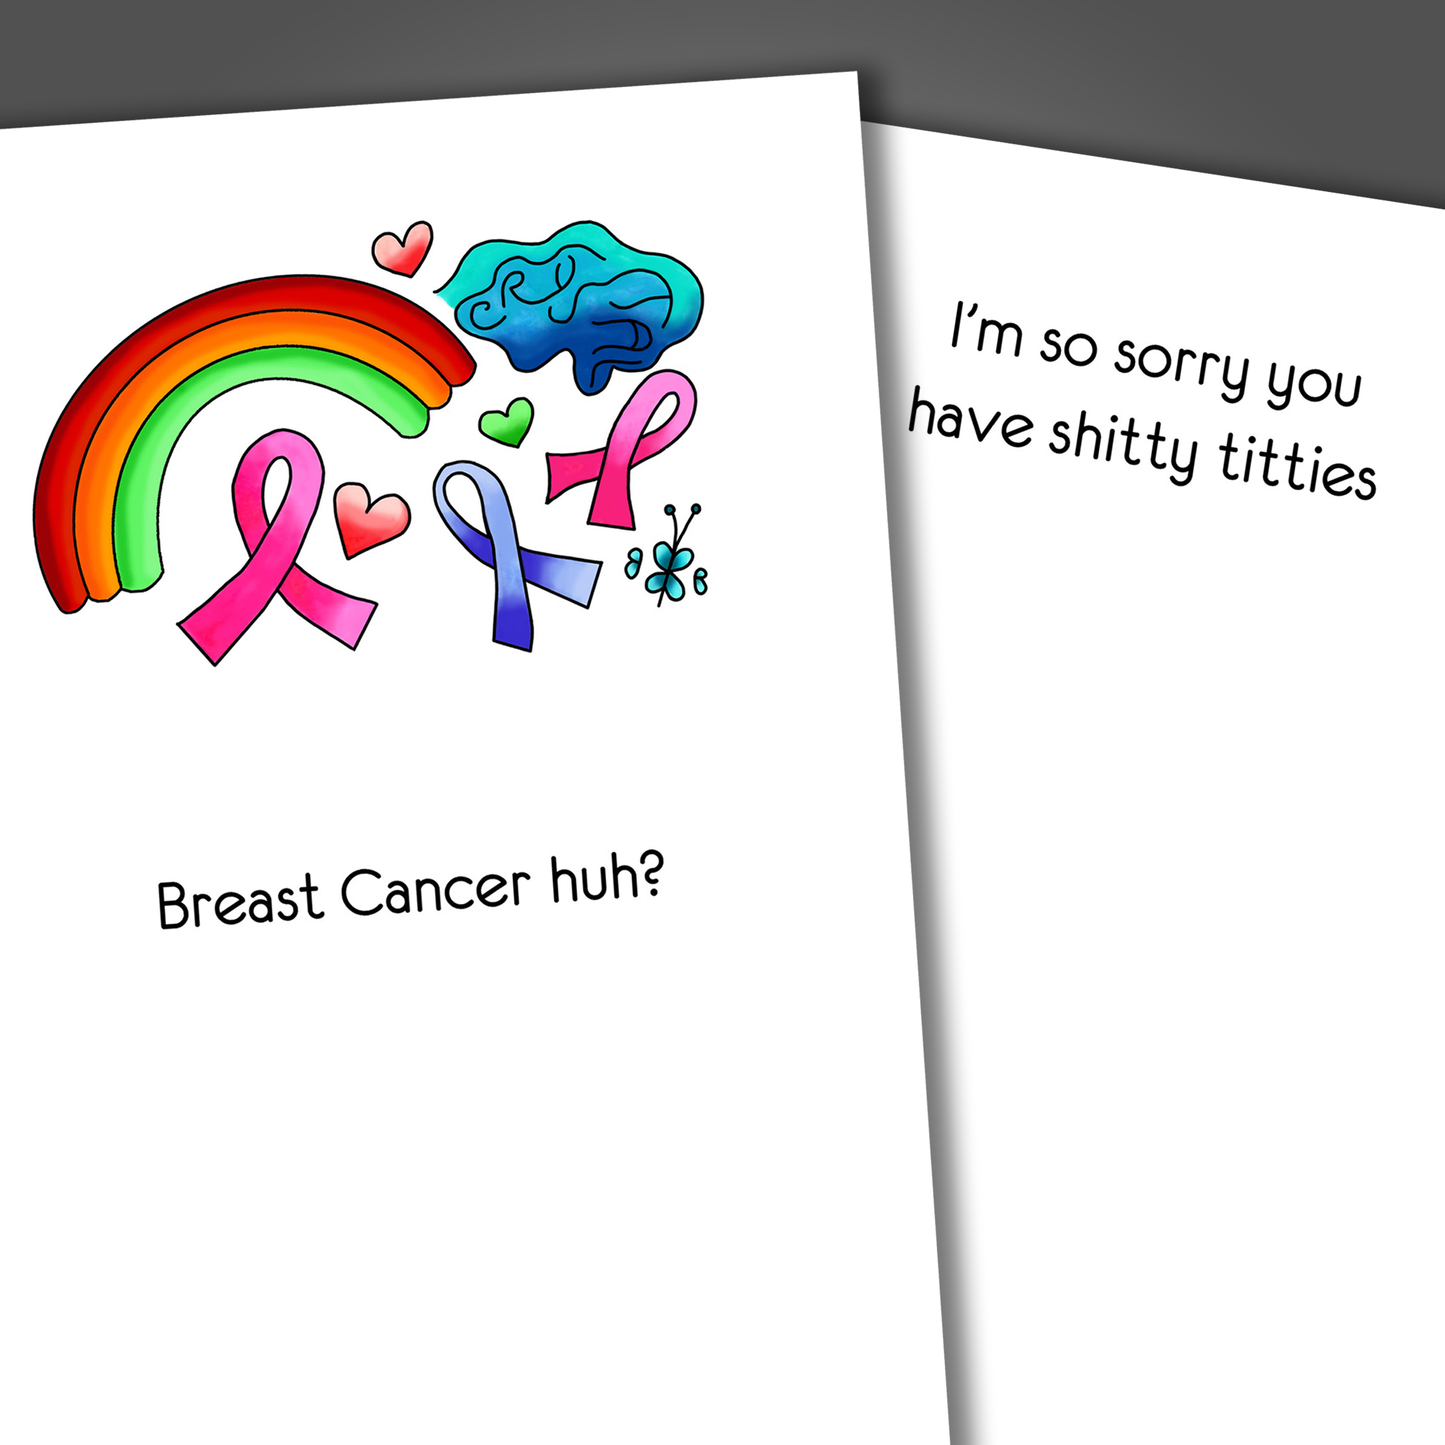 Funny breast cancer support card with a rainbow and ribbons drawn on the front of the card. Inside the card is a funny encouraging joke that says sorry you have shitty titties.